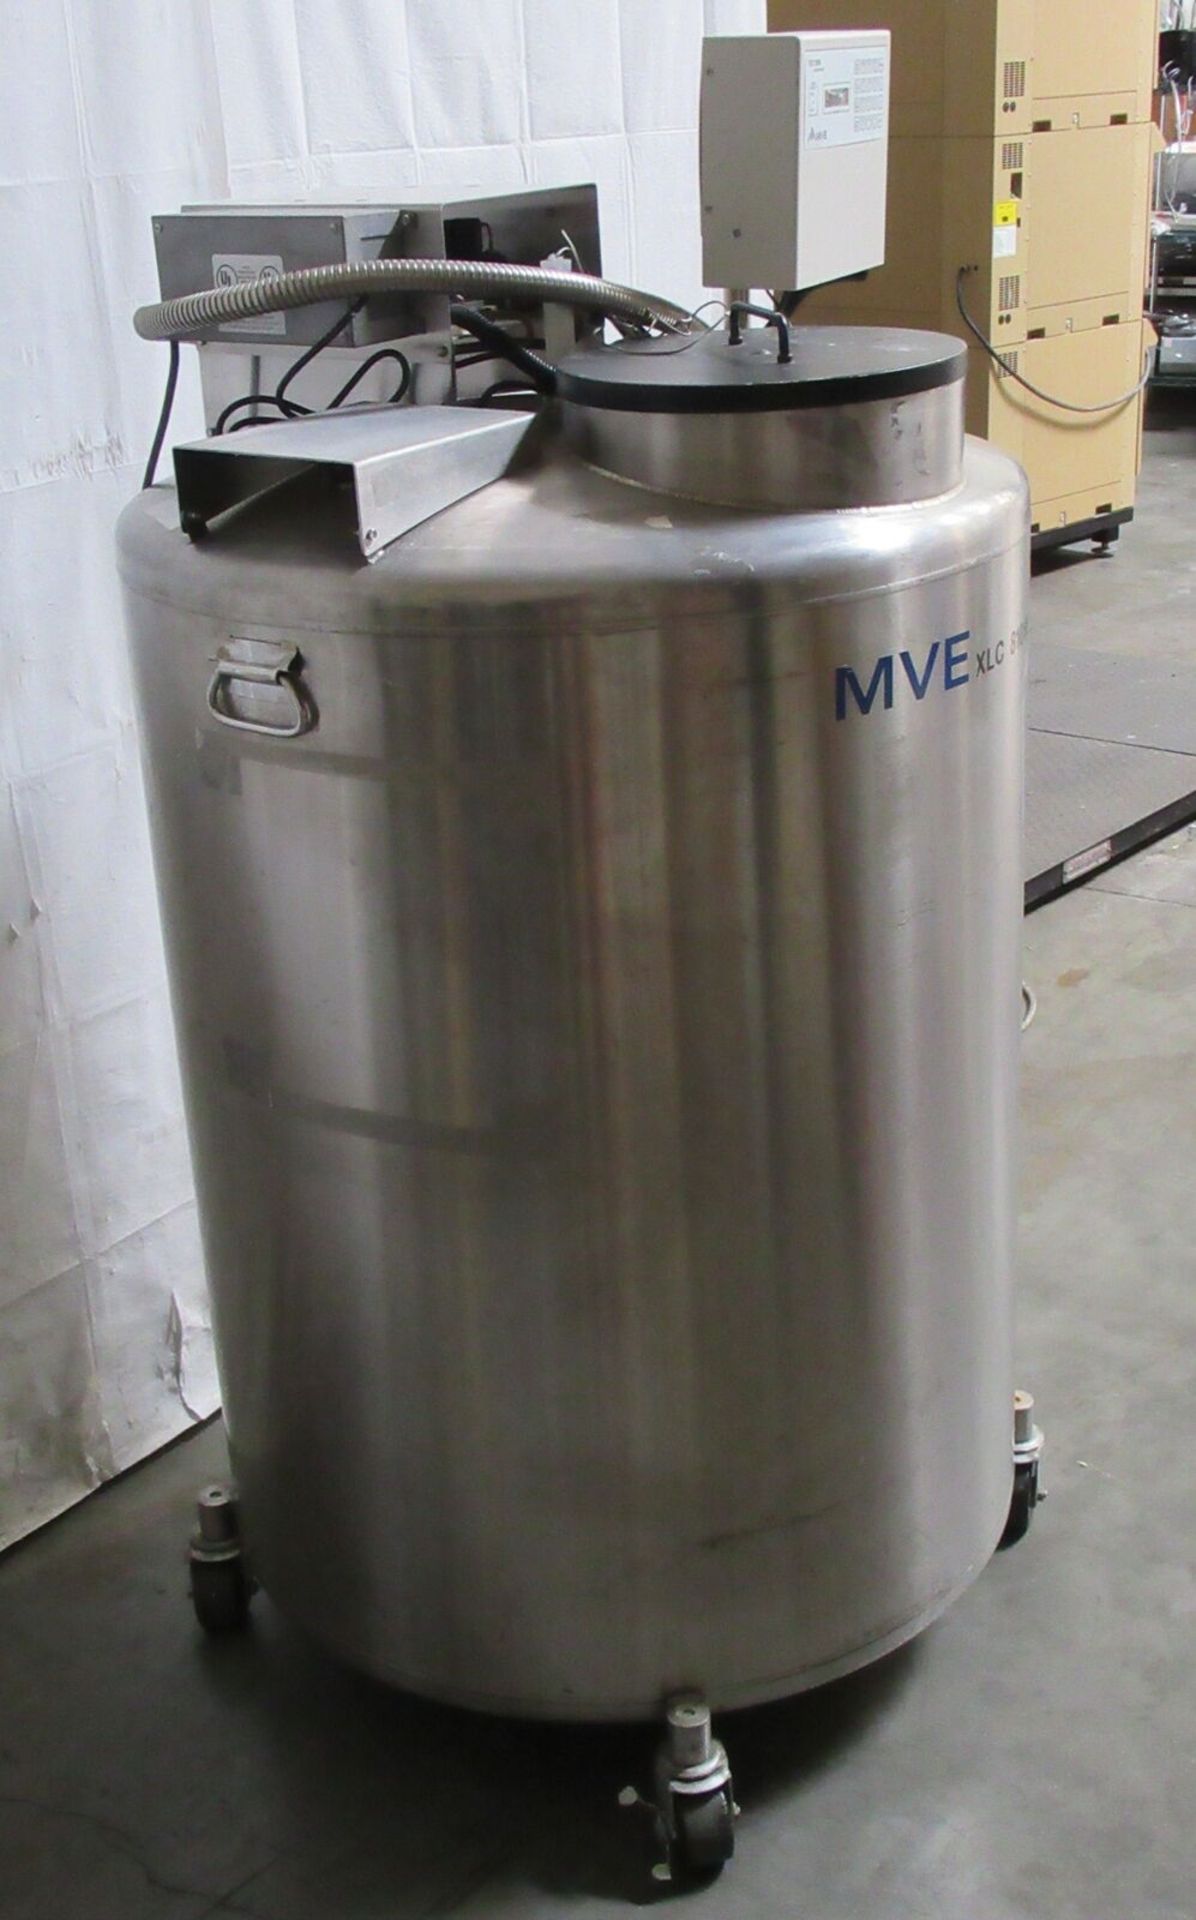 MVE XLC 810HE Cyrogenic Tank w/ TEC 2000 System Monitor, 11x Carriers - Gilroy - Image 3 of 11